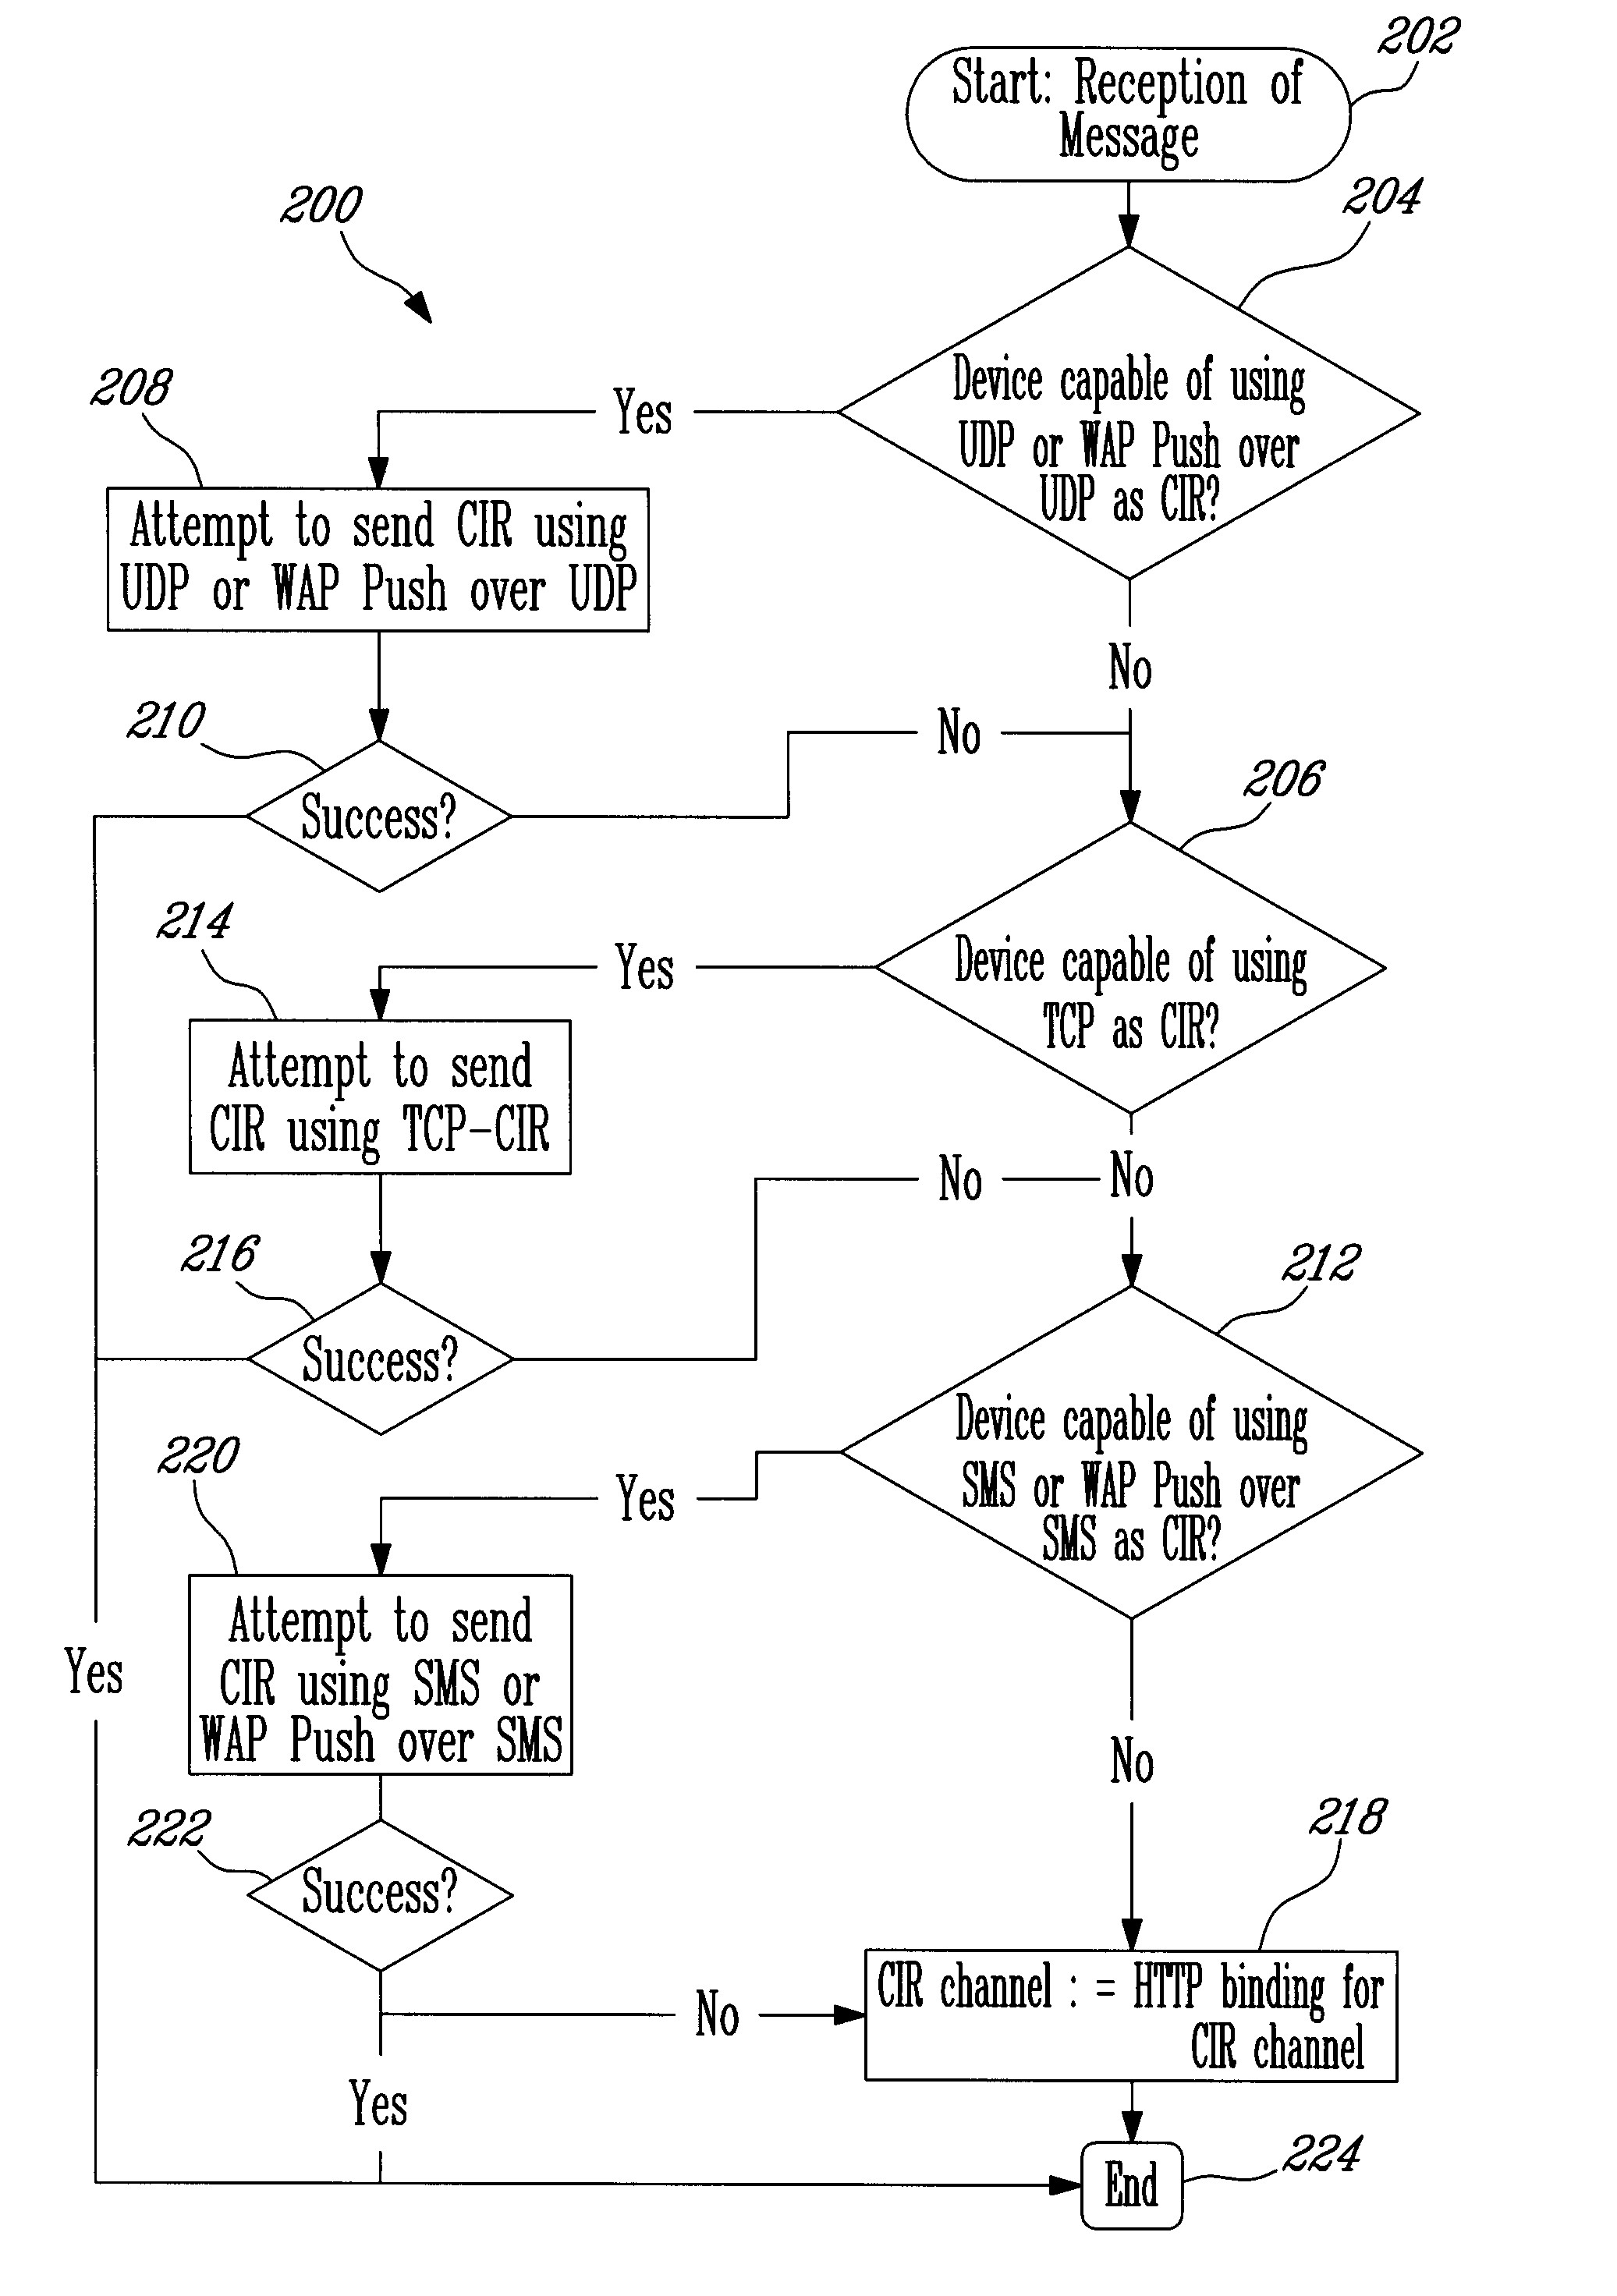 Method and System for Communicating Message Notifications to Mobile Devices